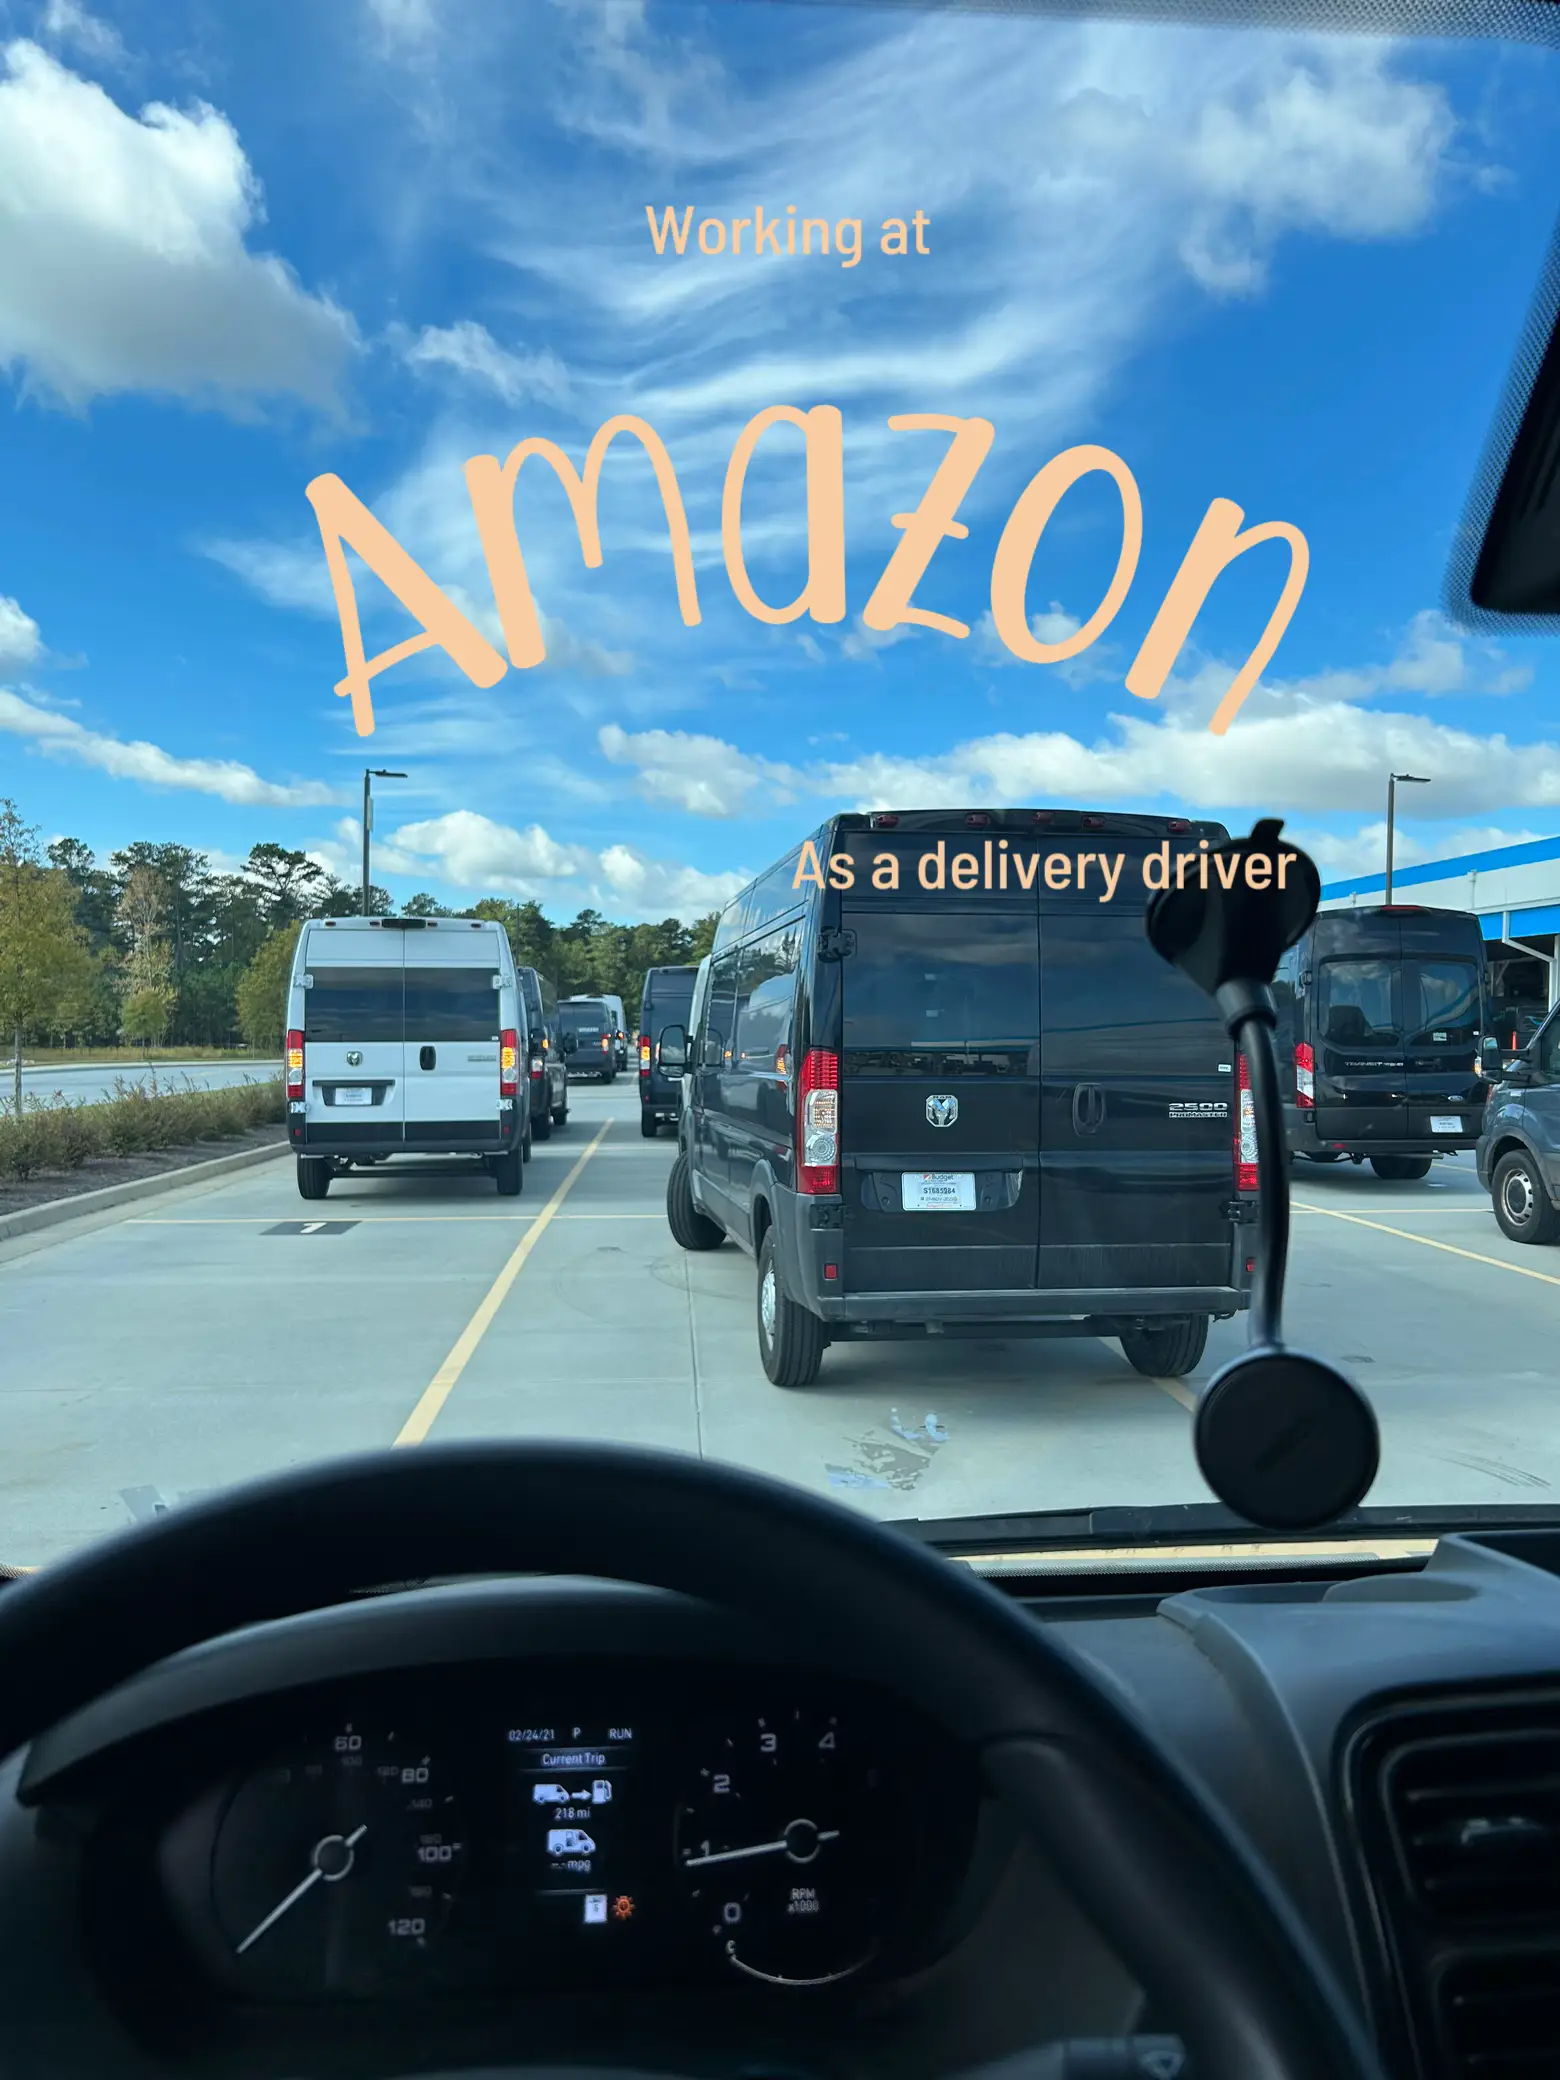 Walmart Spark delivery app for automotive and tires - Lemon8 Search